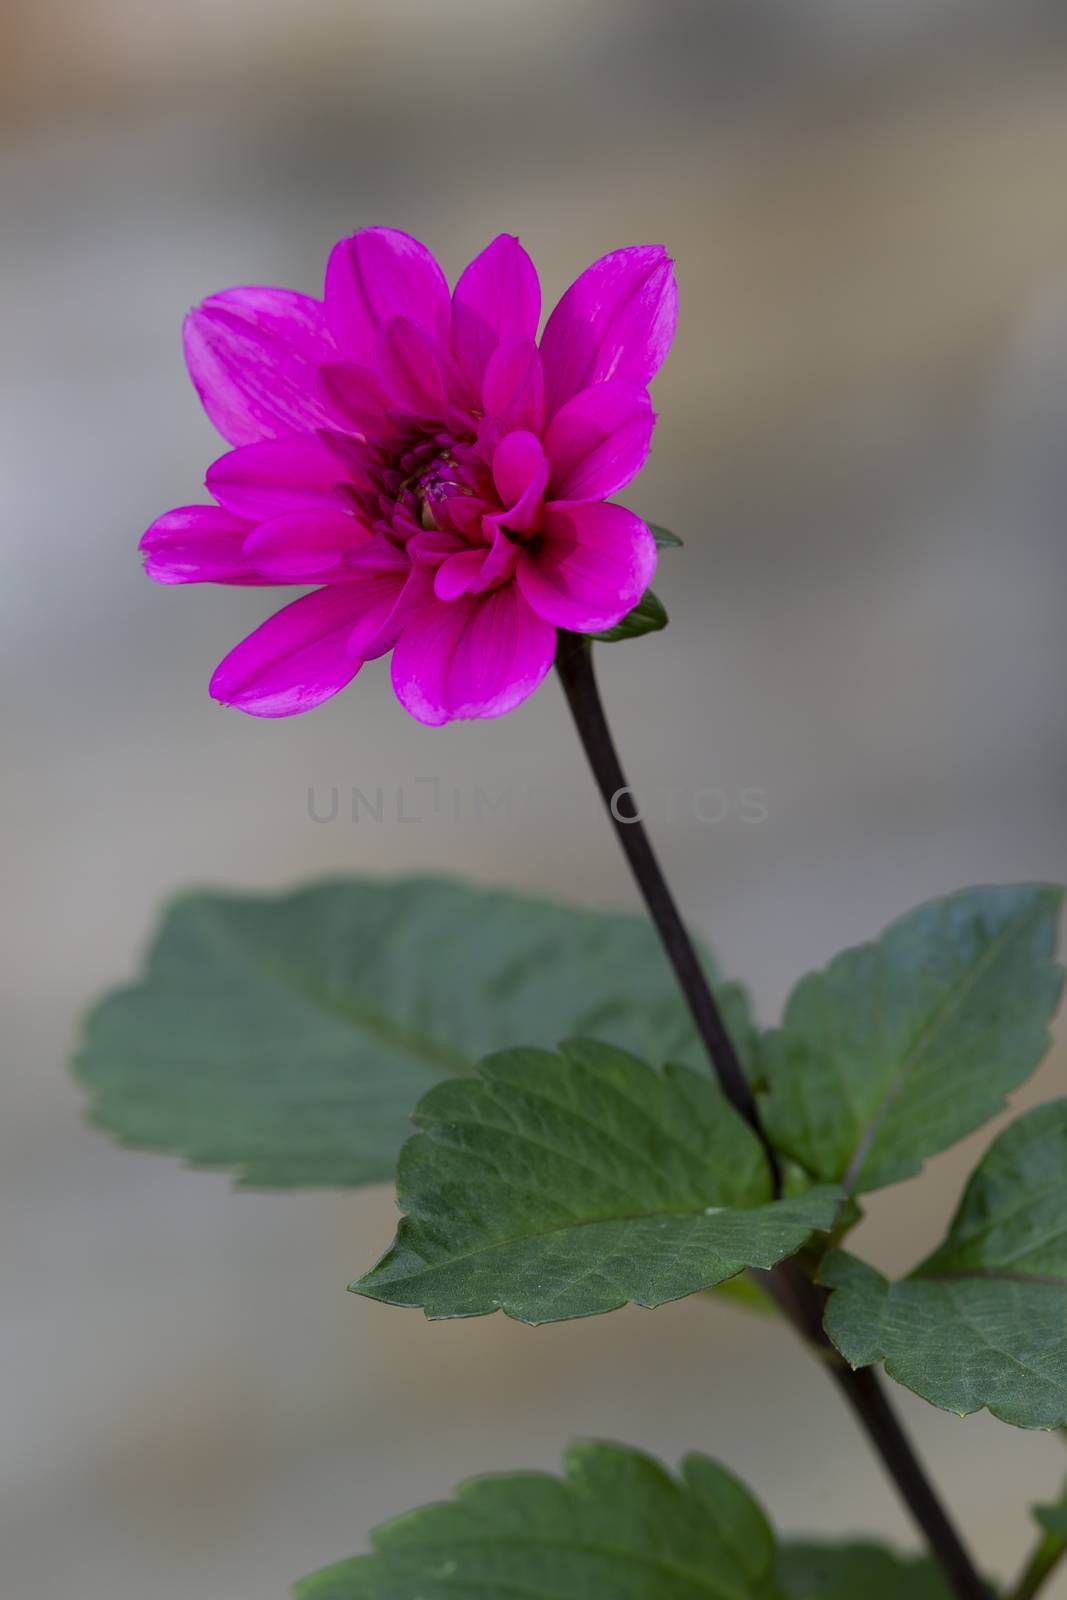 A blossoming pink flower with a long stem and green leaves by WittkePhotos